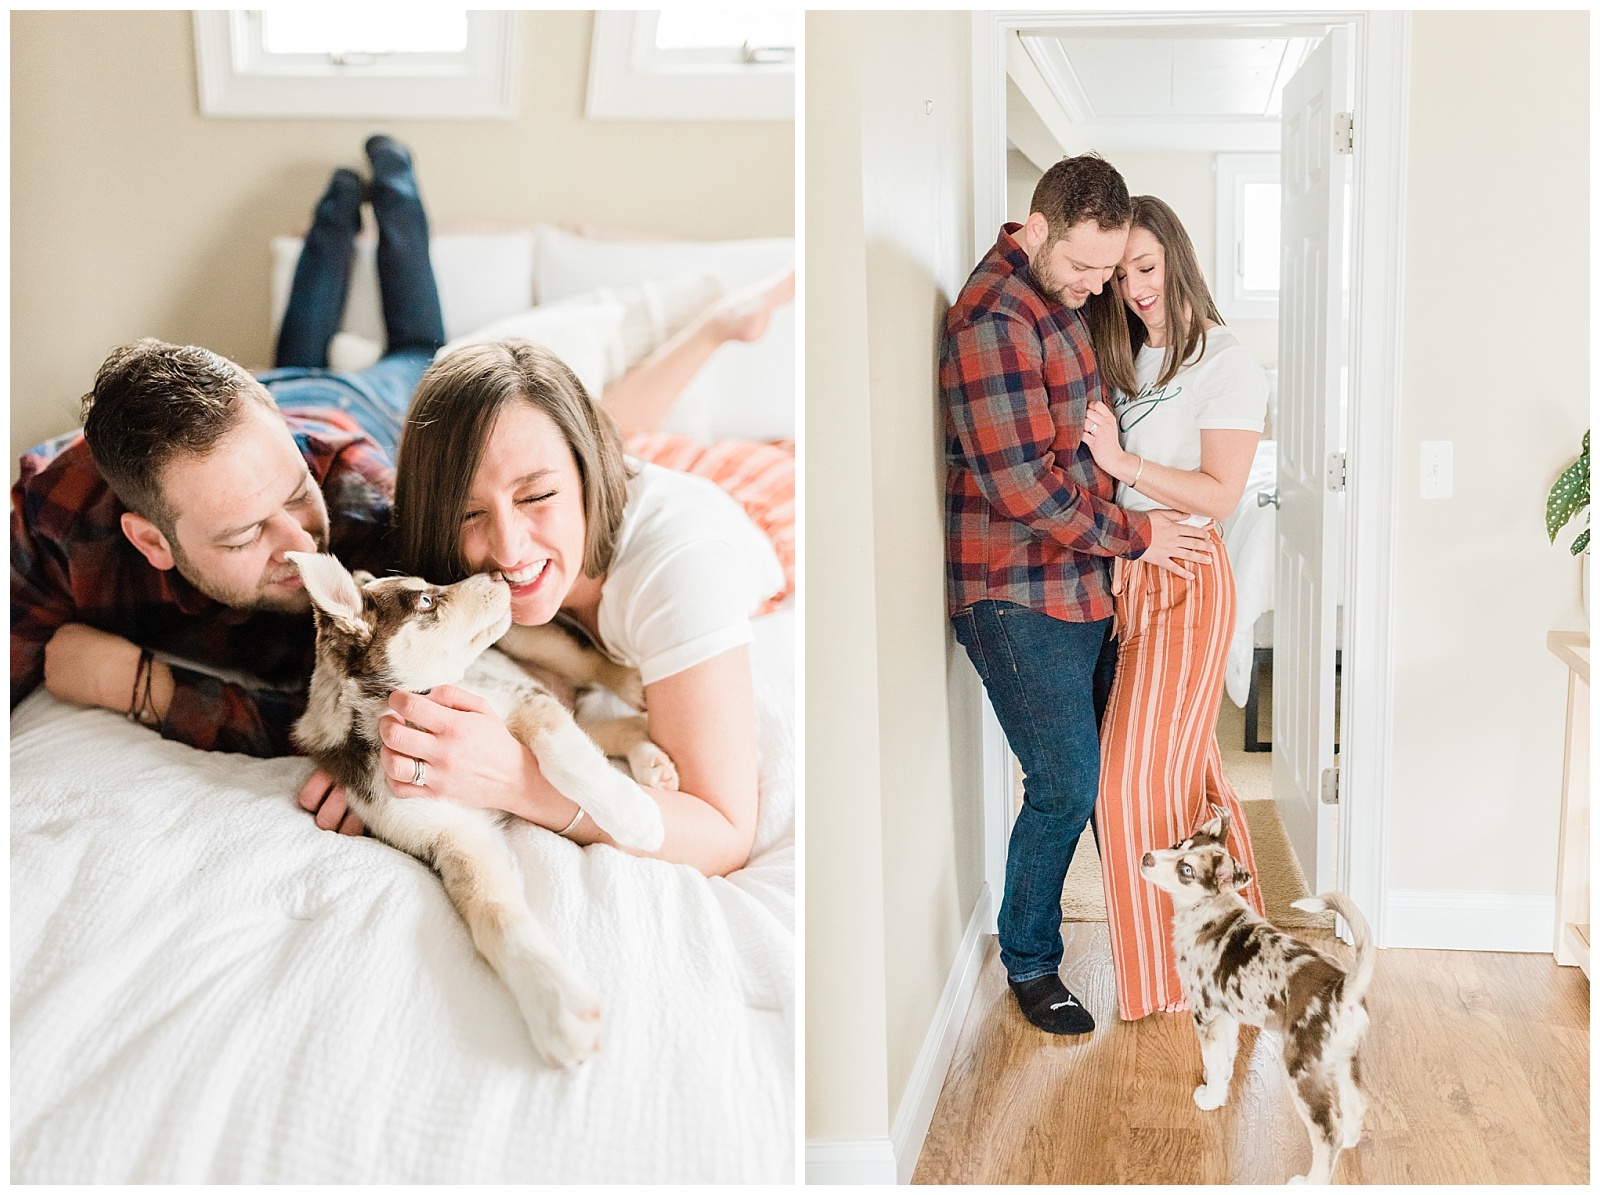 In home photo session, new puppy, casual, weekend, new jersey lifestyle, natural light photographer, laughter